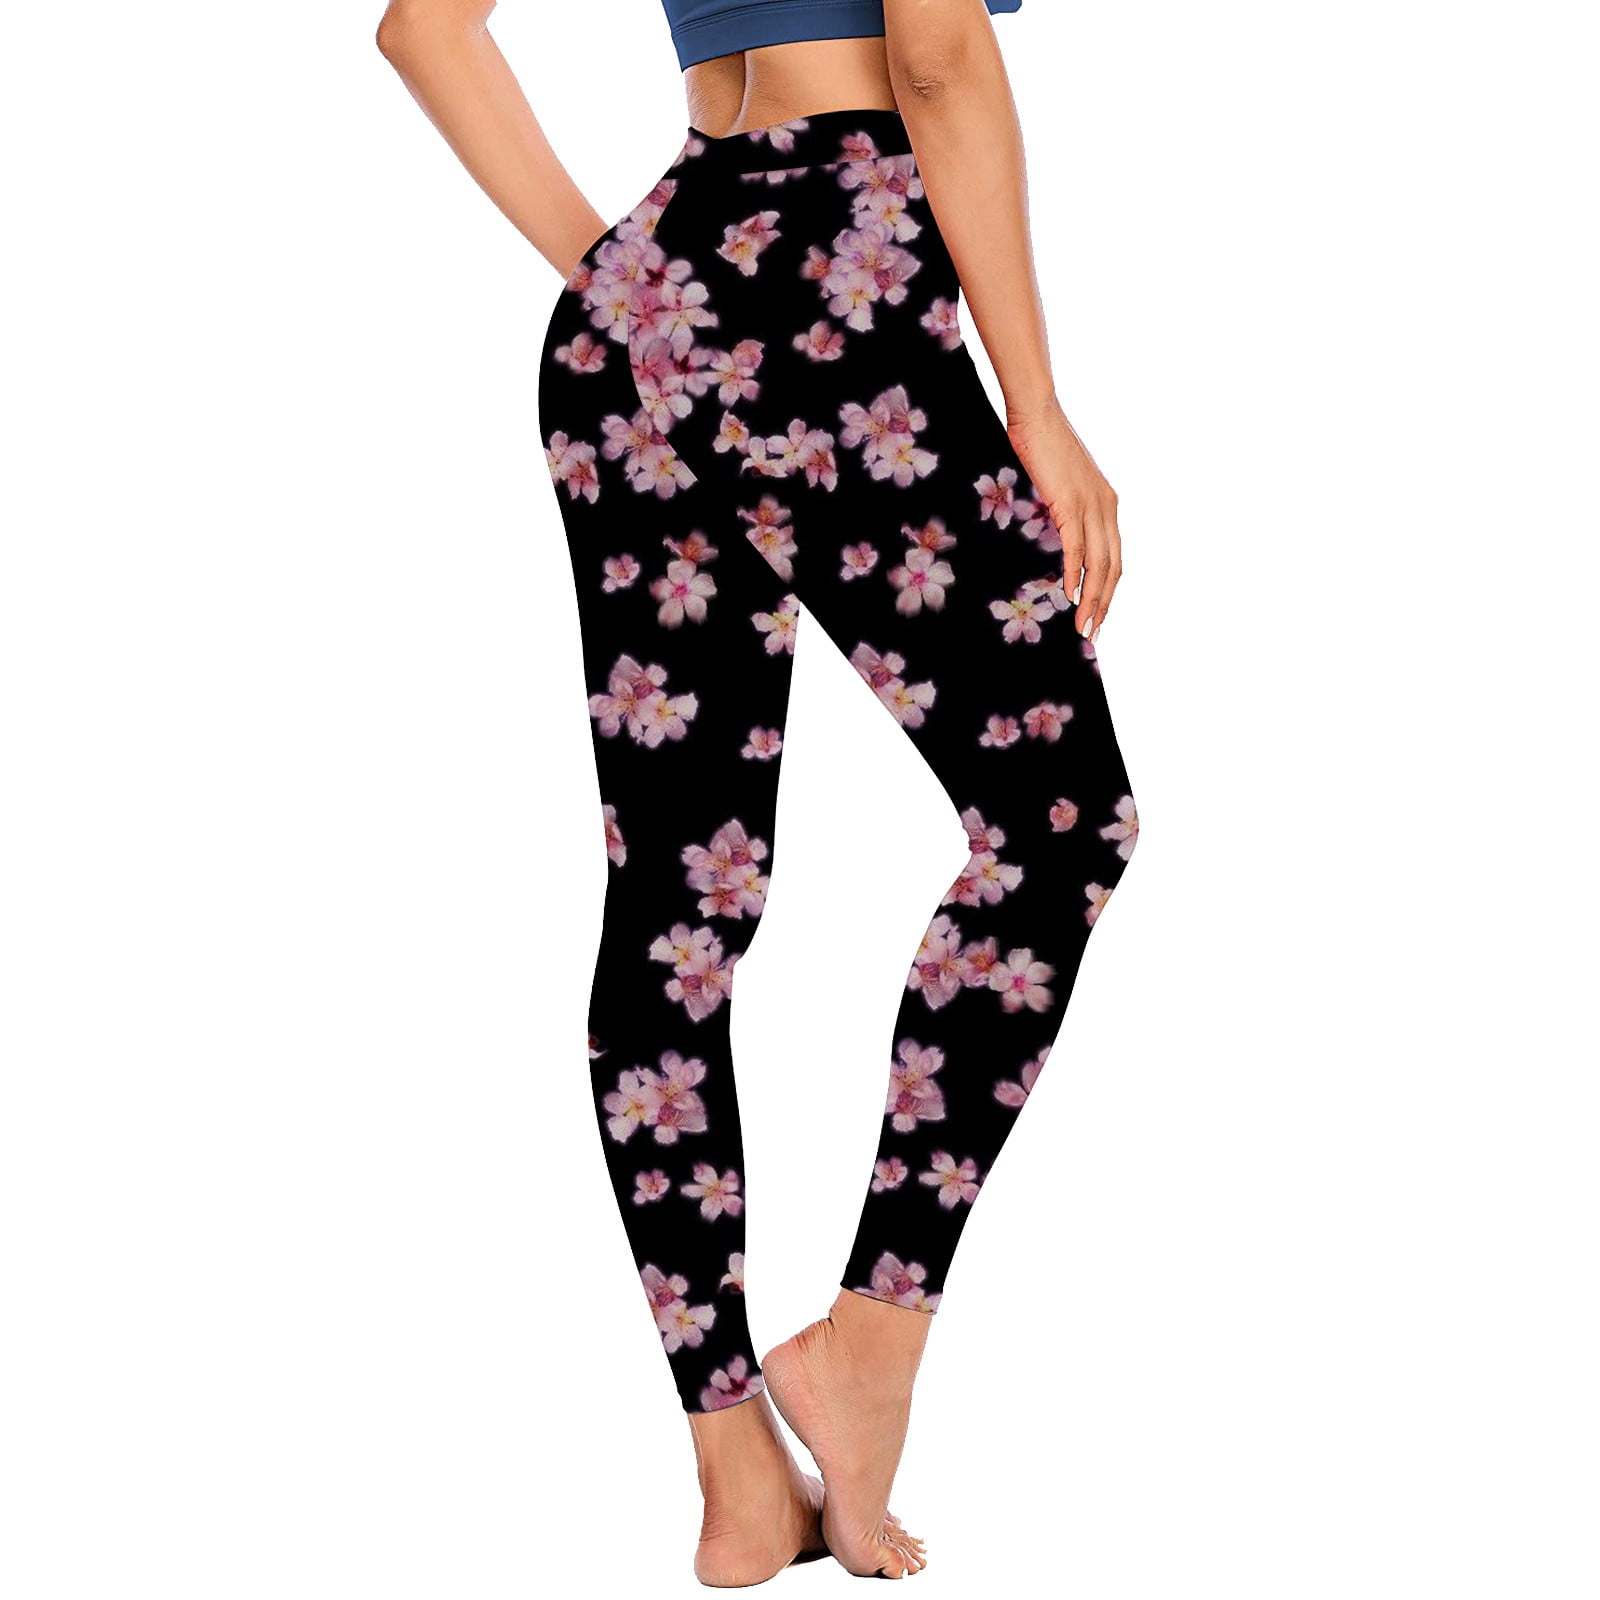 YWDJ Tights for Women Workout Butt Lifting Gym Long Length High Waist  Casual Sports Yogalicious Print Patterned Wide Leg Fashion Utility Dressy  Everyday Soft Flower Gradient Printing Elastic Black L 